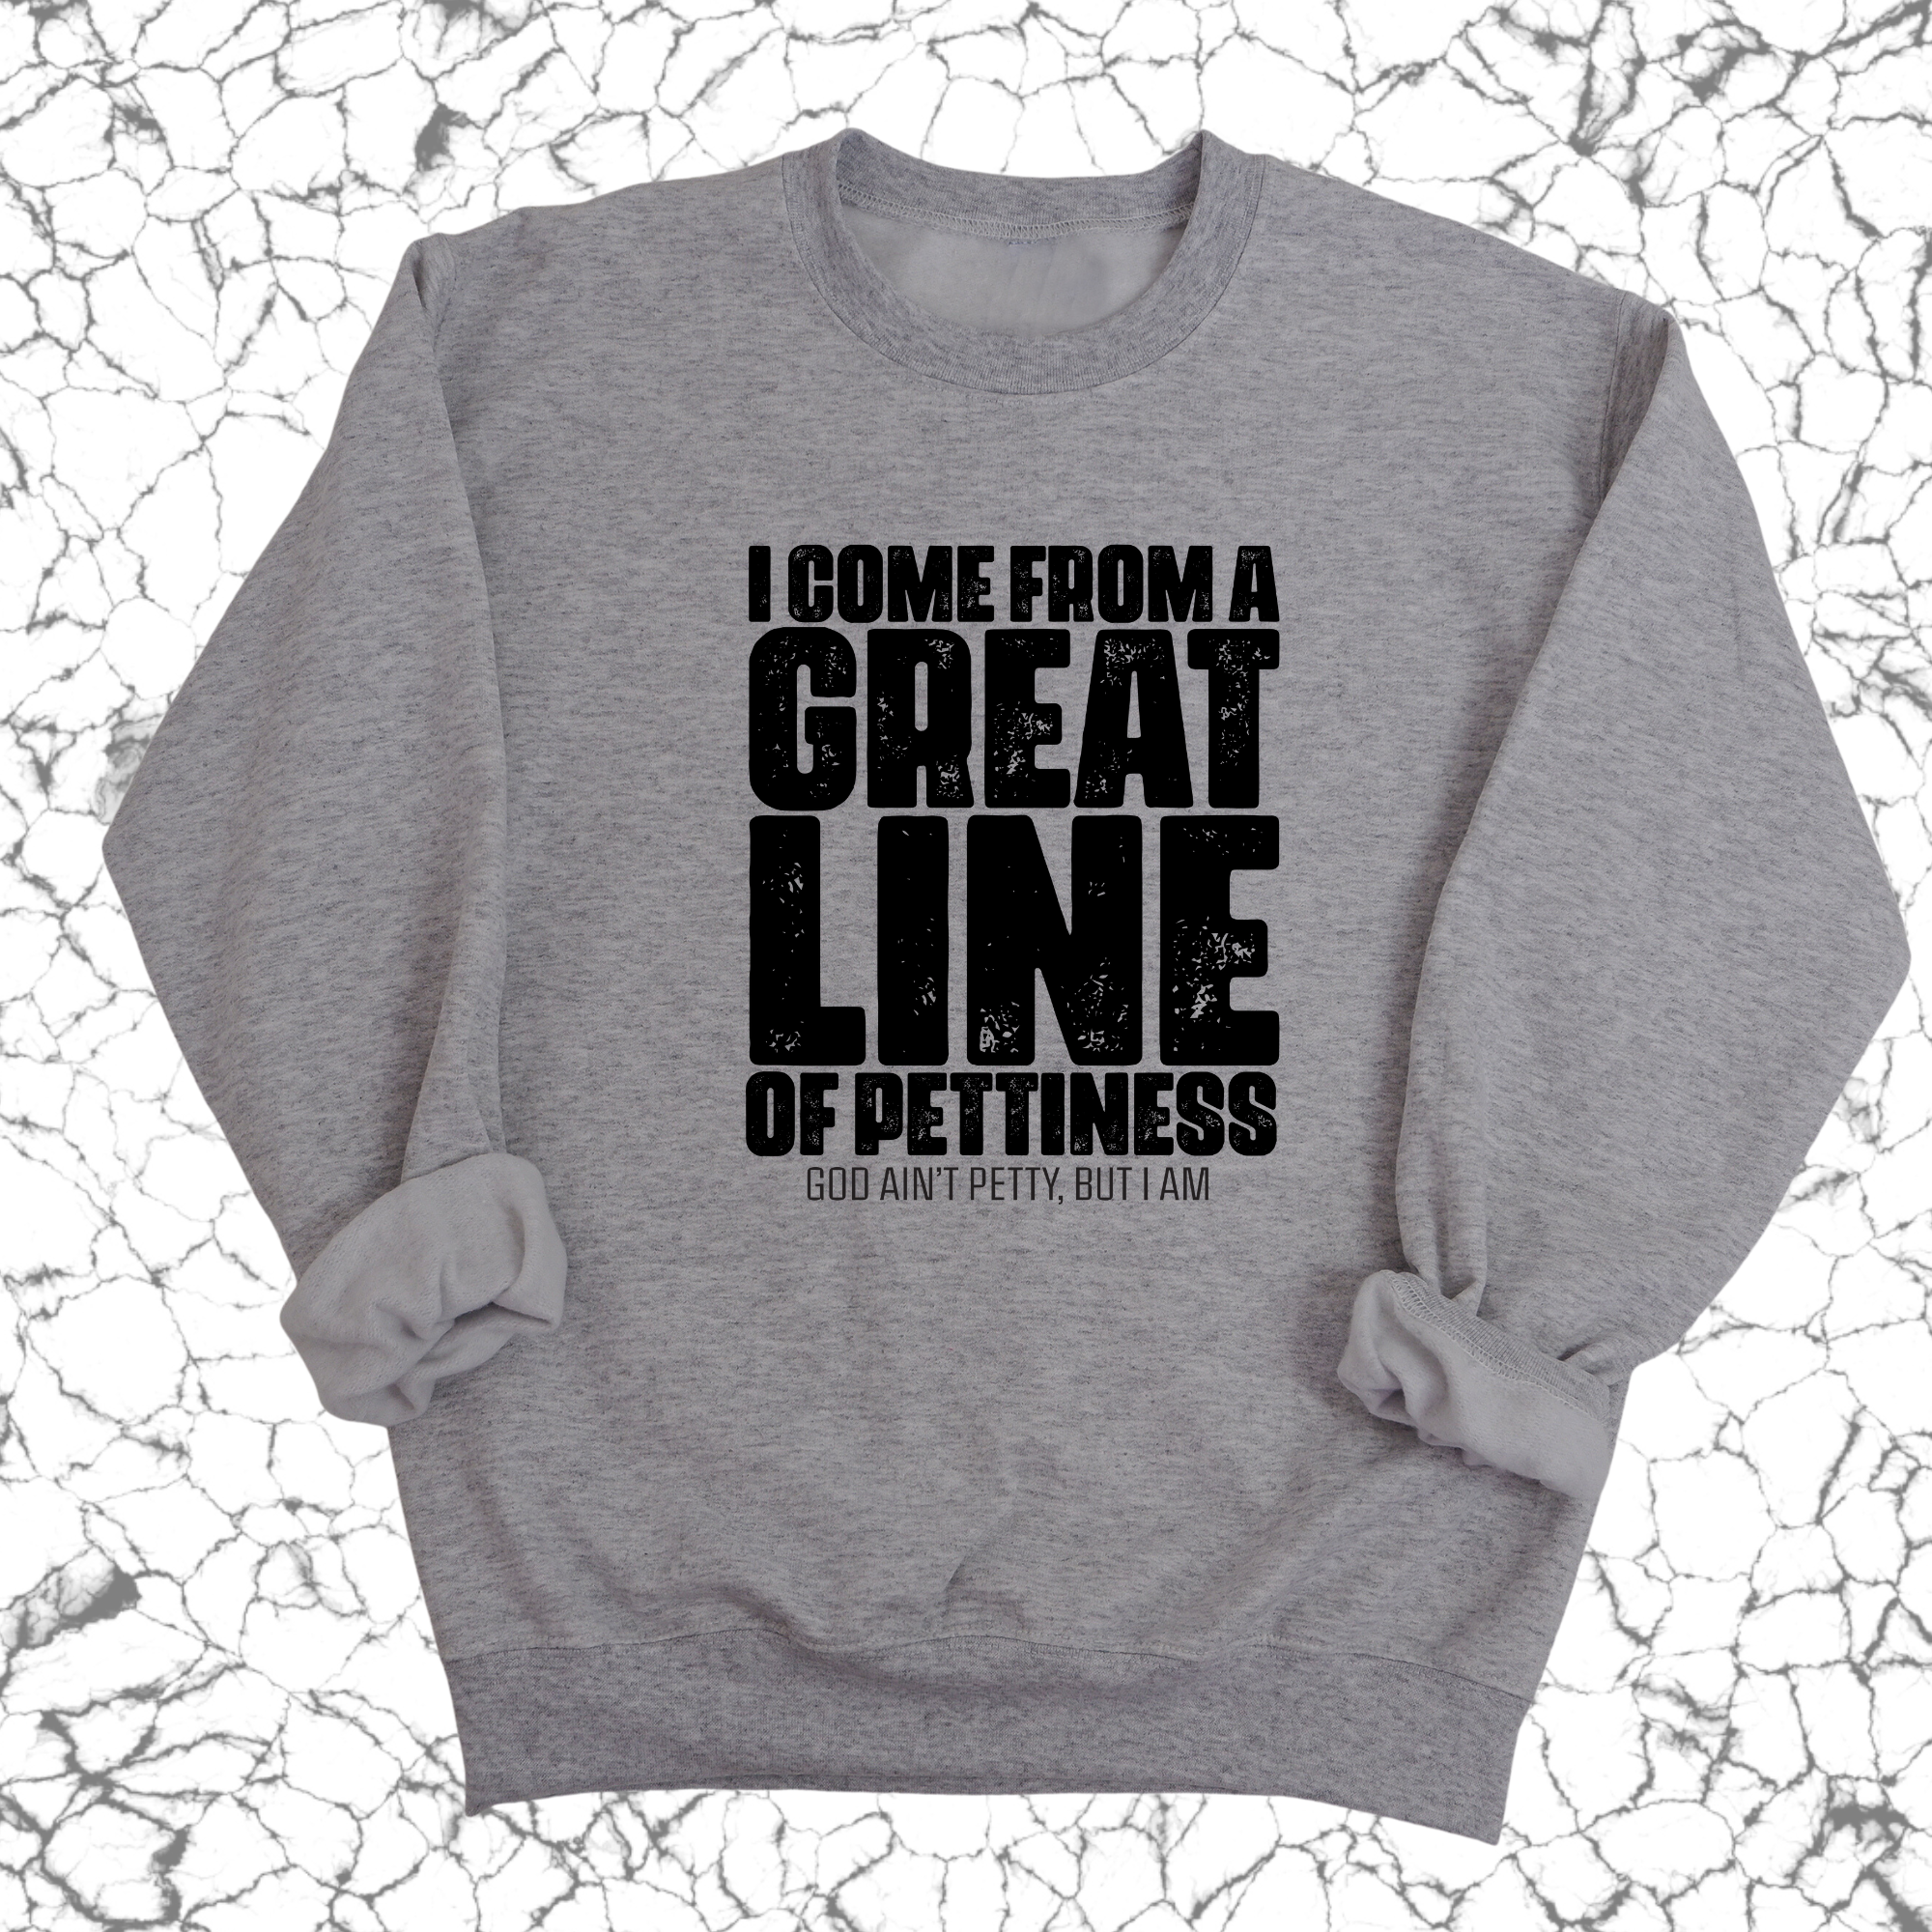 I come from a Great Line of Pettiness Unisex Sweatshirt-Sweatshirt-The Original God Ain't Petty But I Am